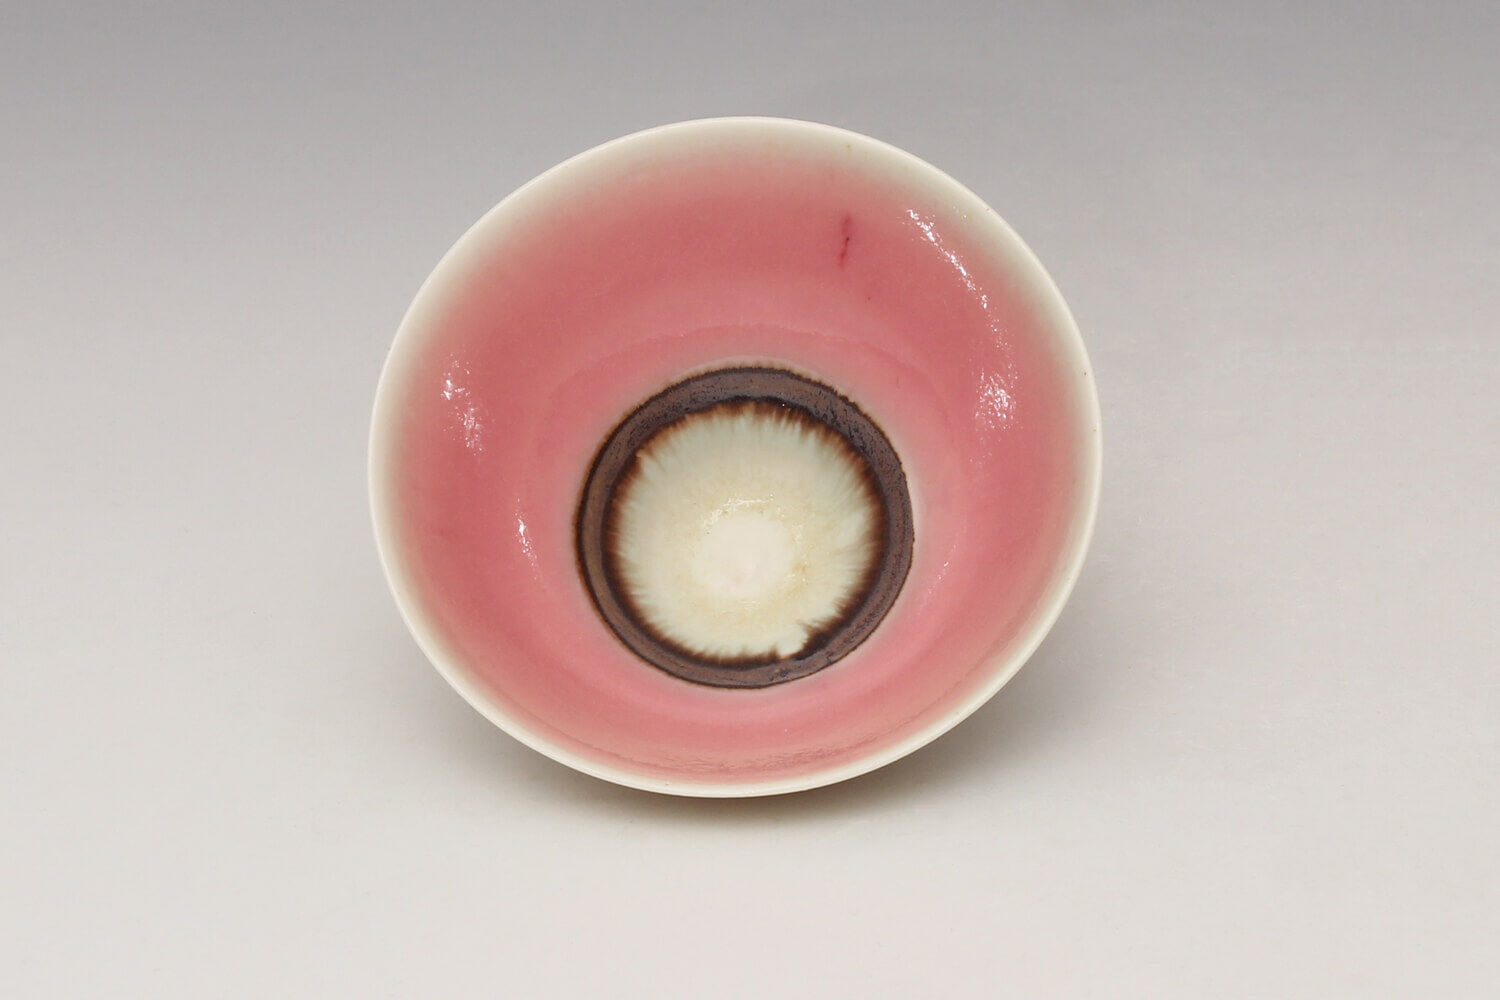 Peter Wills Small Porcelain Bowl 224